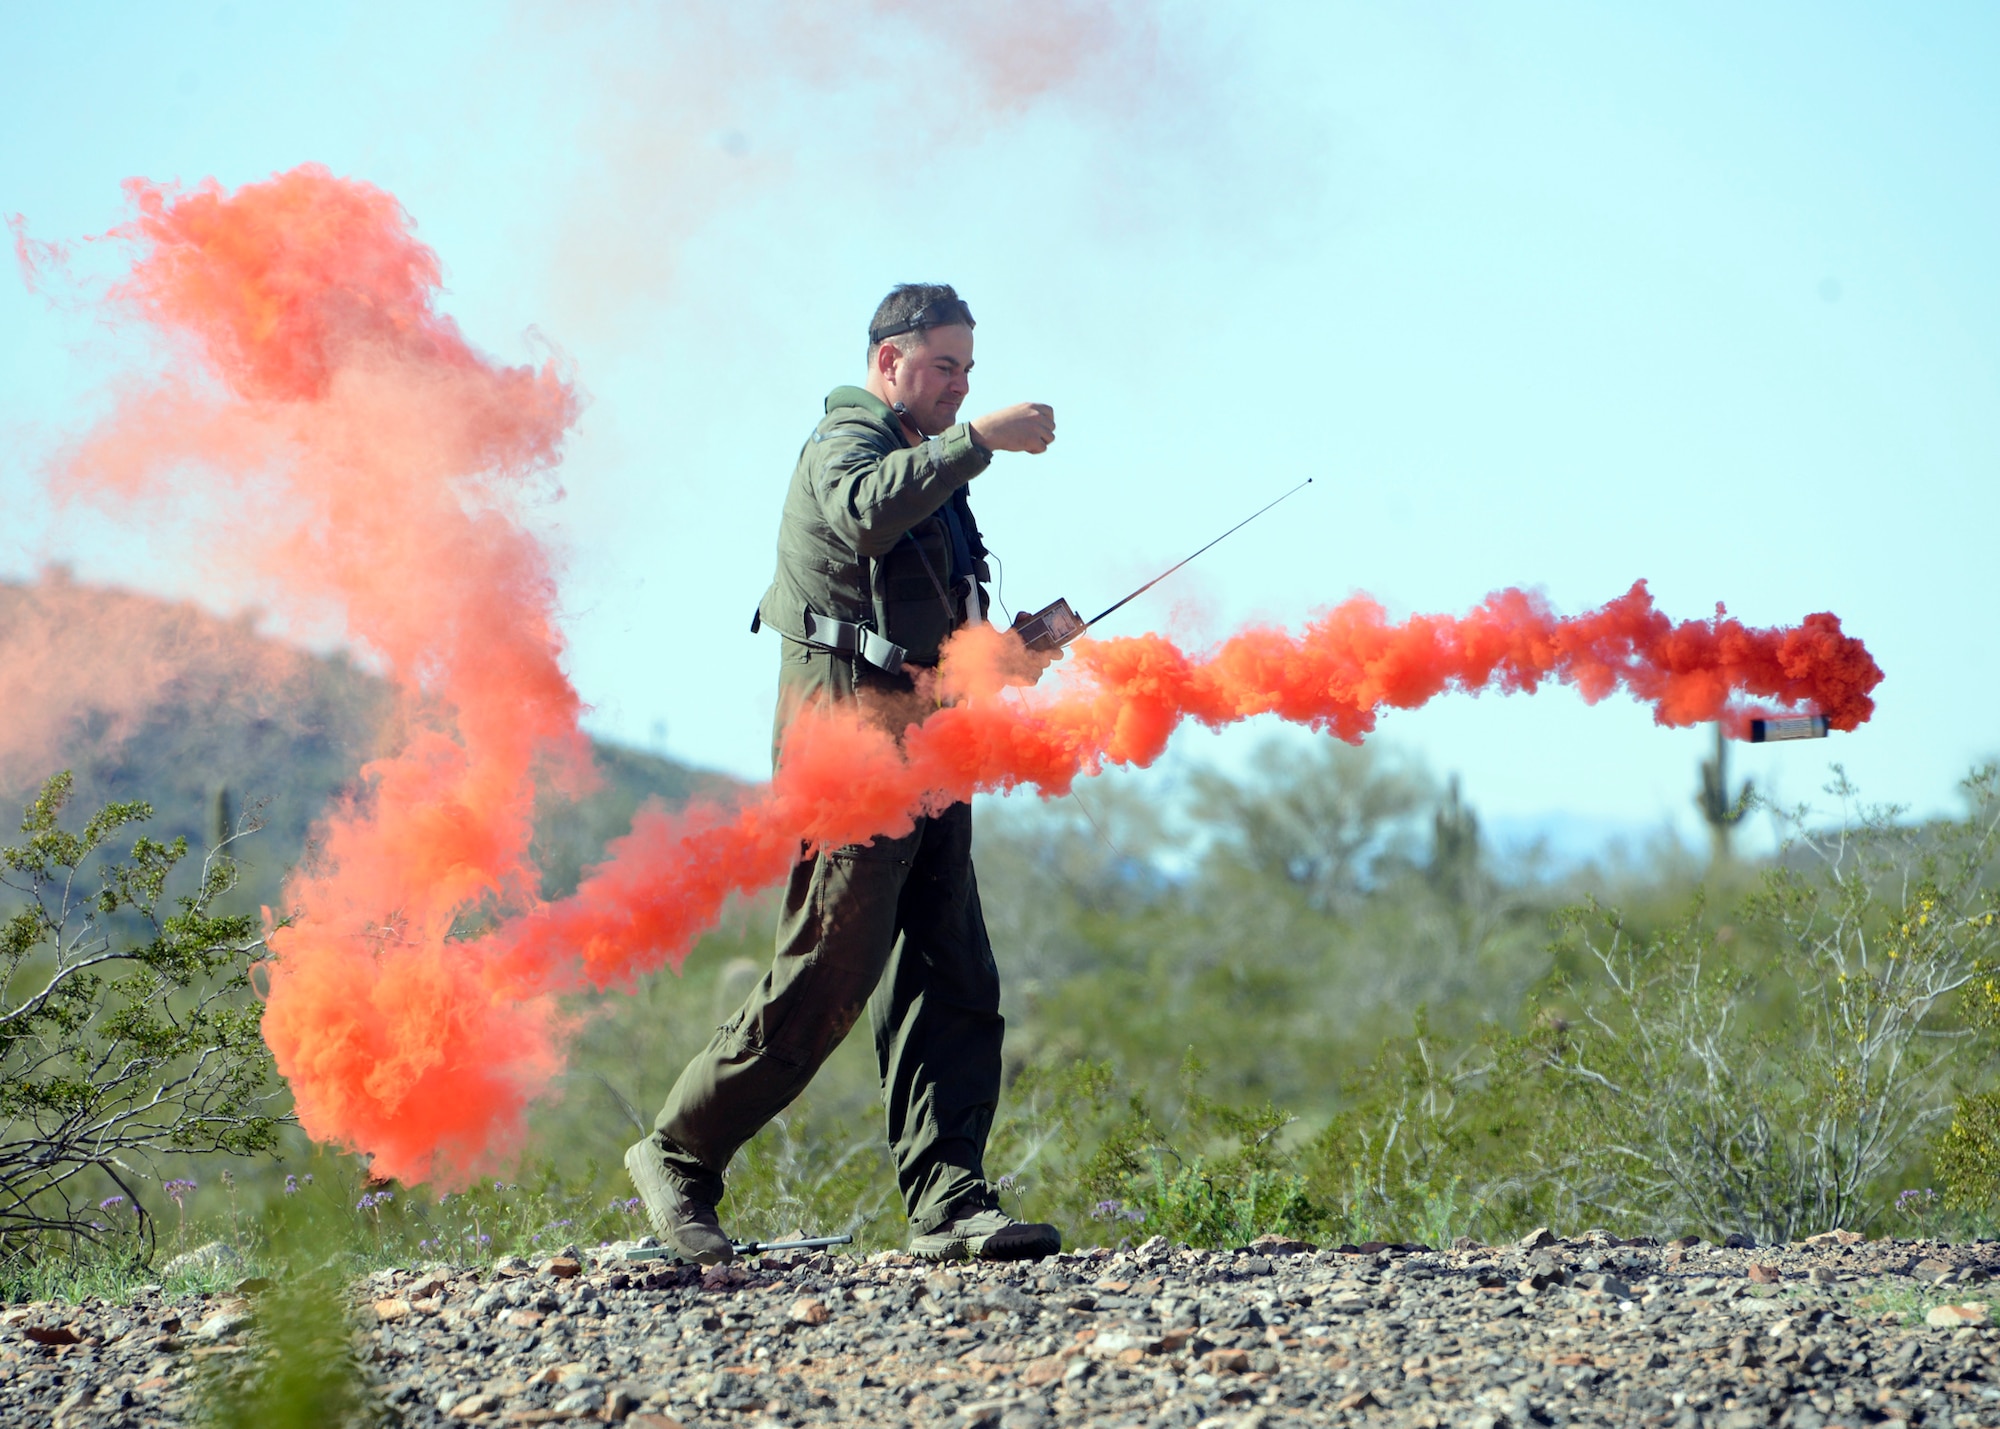 Maj. Nicholas Suppa, 56th Operations Support Squadron assistant director of operations, throws a smoke screen to alert rescue personnel during a Major Accident Response Exercise at a remote area in Arizona, March 1, 2017. The exercise highlighted the way Air Force and civilian assets can be used together to more effectively respond to crises, and potentially save lives.  (U.S. Air Force photo by Senior Airman Devante Williams)